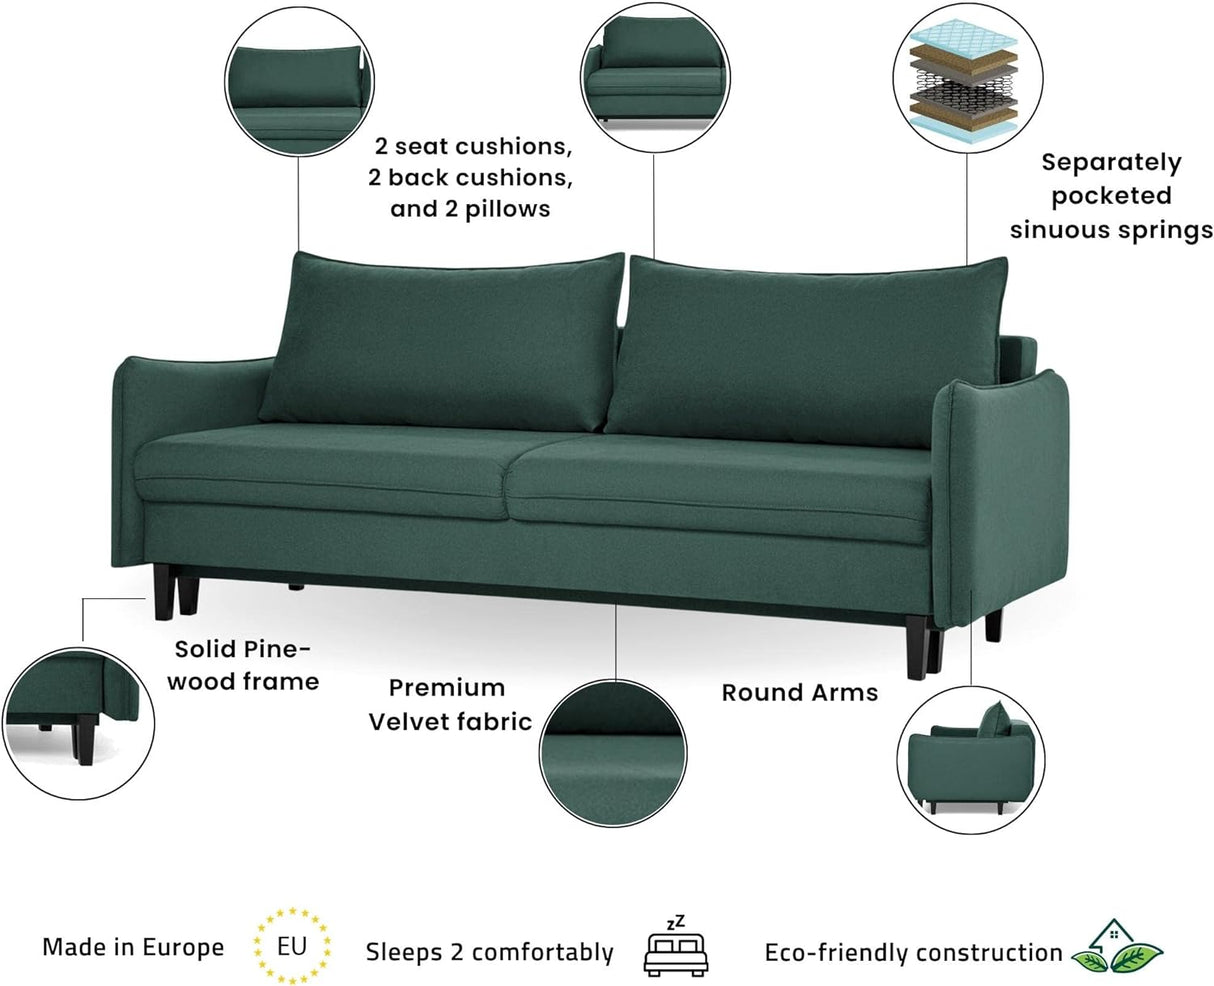 Modern Carmella Sleeper Sofa - Storage Pull Out Sofa Bed Pocket Sinuous Springs, Pine Wood Frame, Velvet Upholstery, Sleek Arms, Made in Europe, Queen Size 85In W X 39In D X 35In H – Green